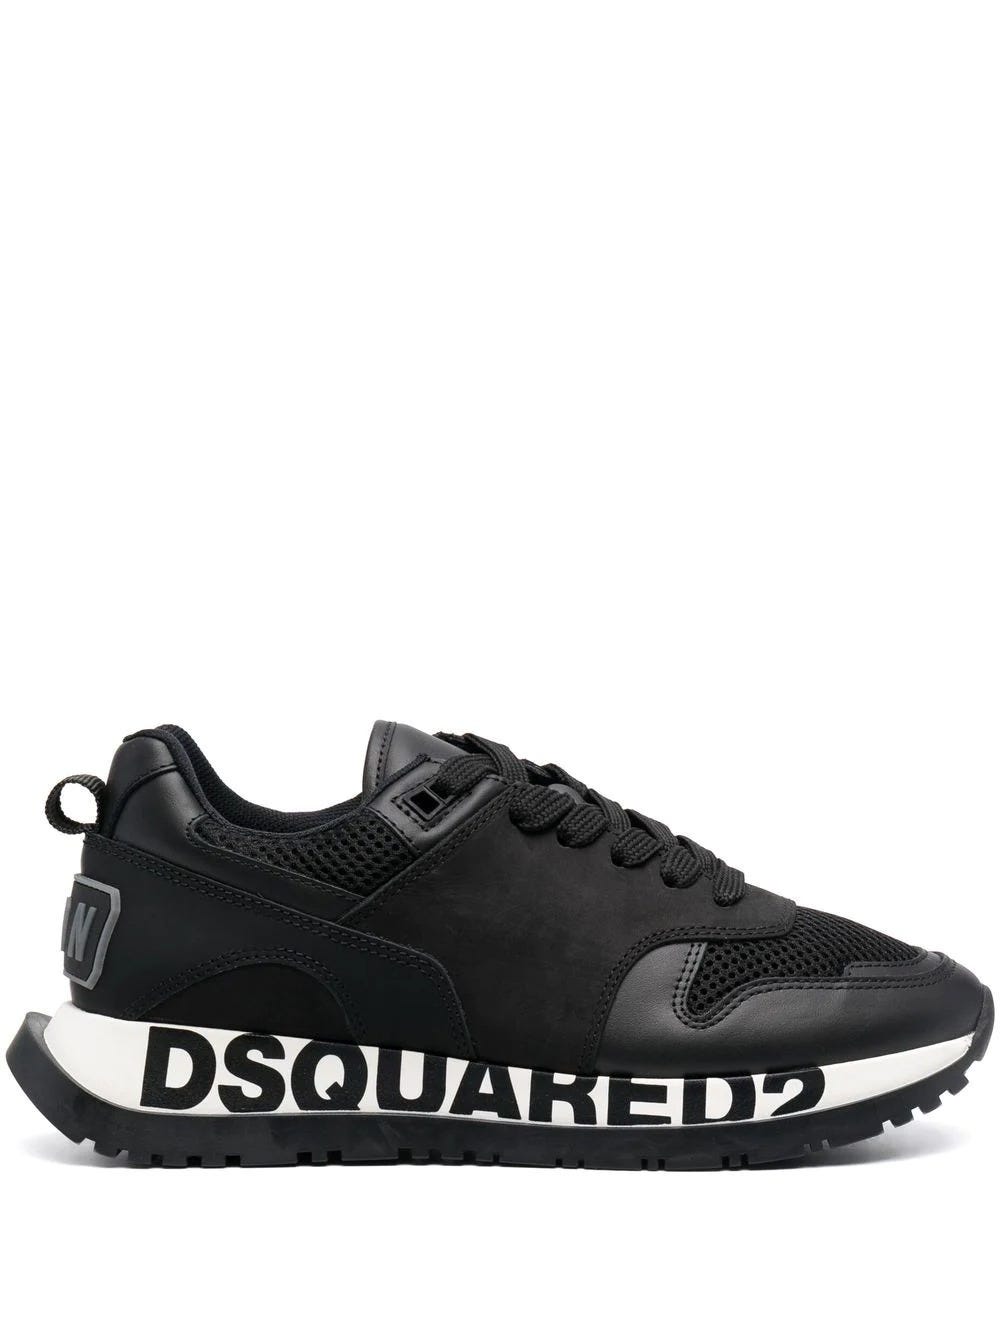 DSQUARED2 PRINTED SNEAKERS